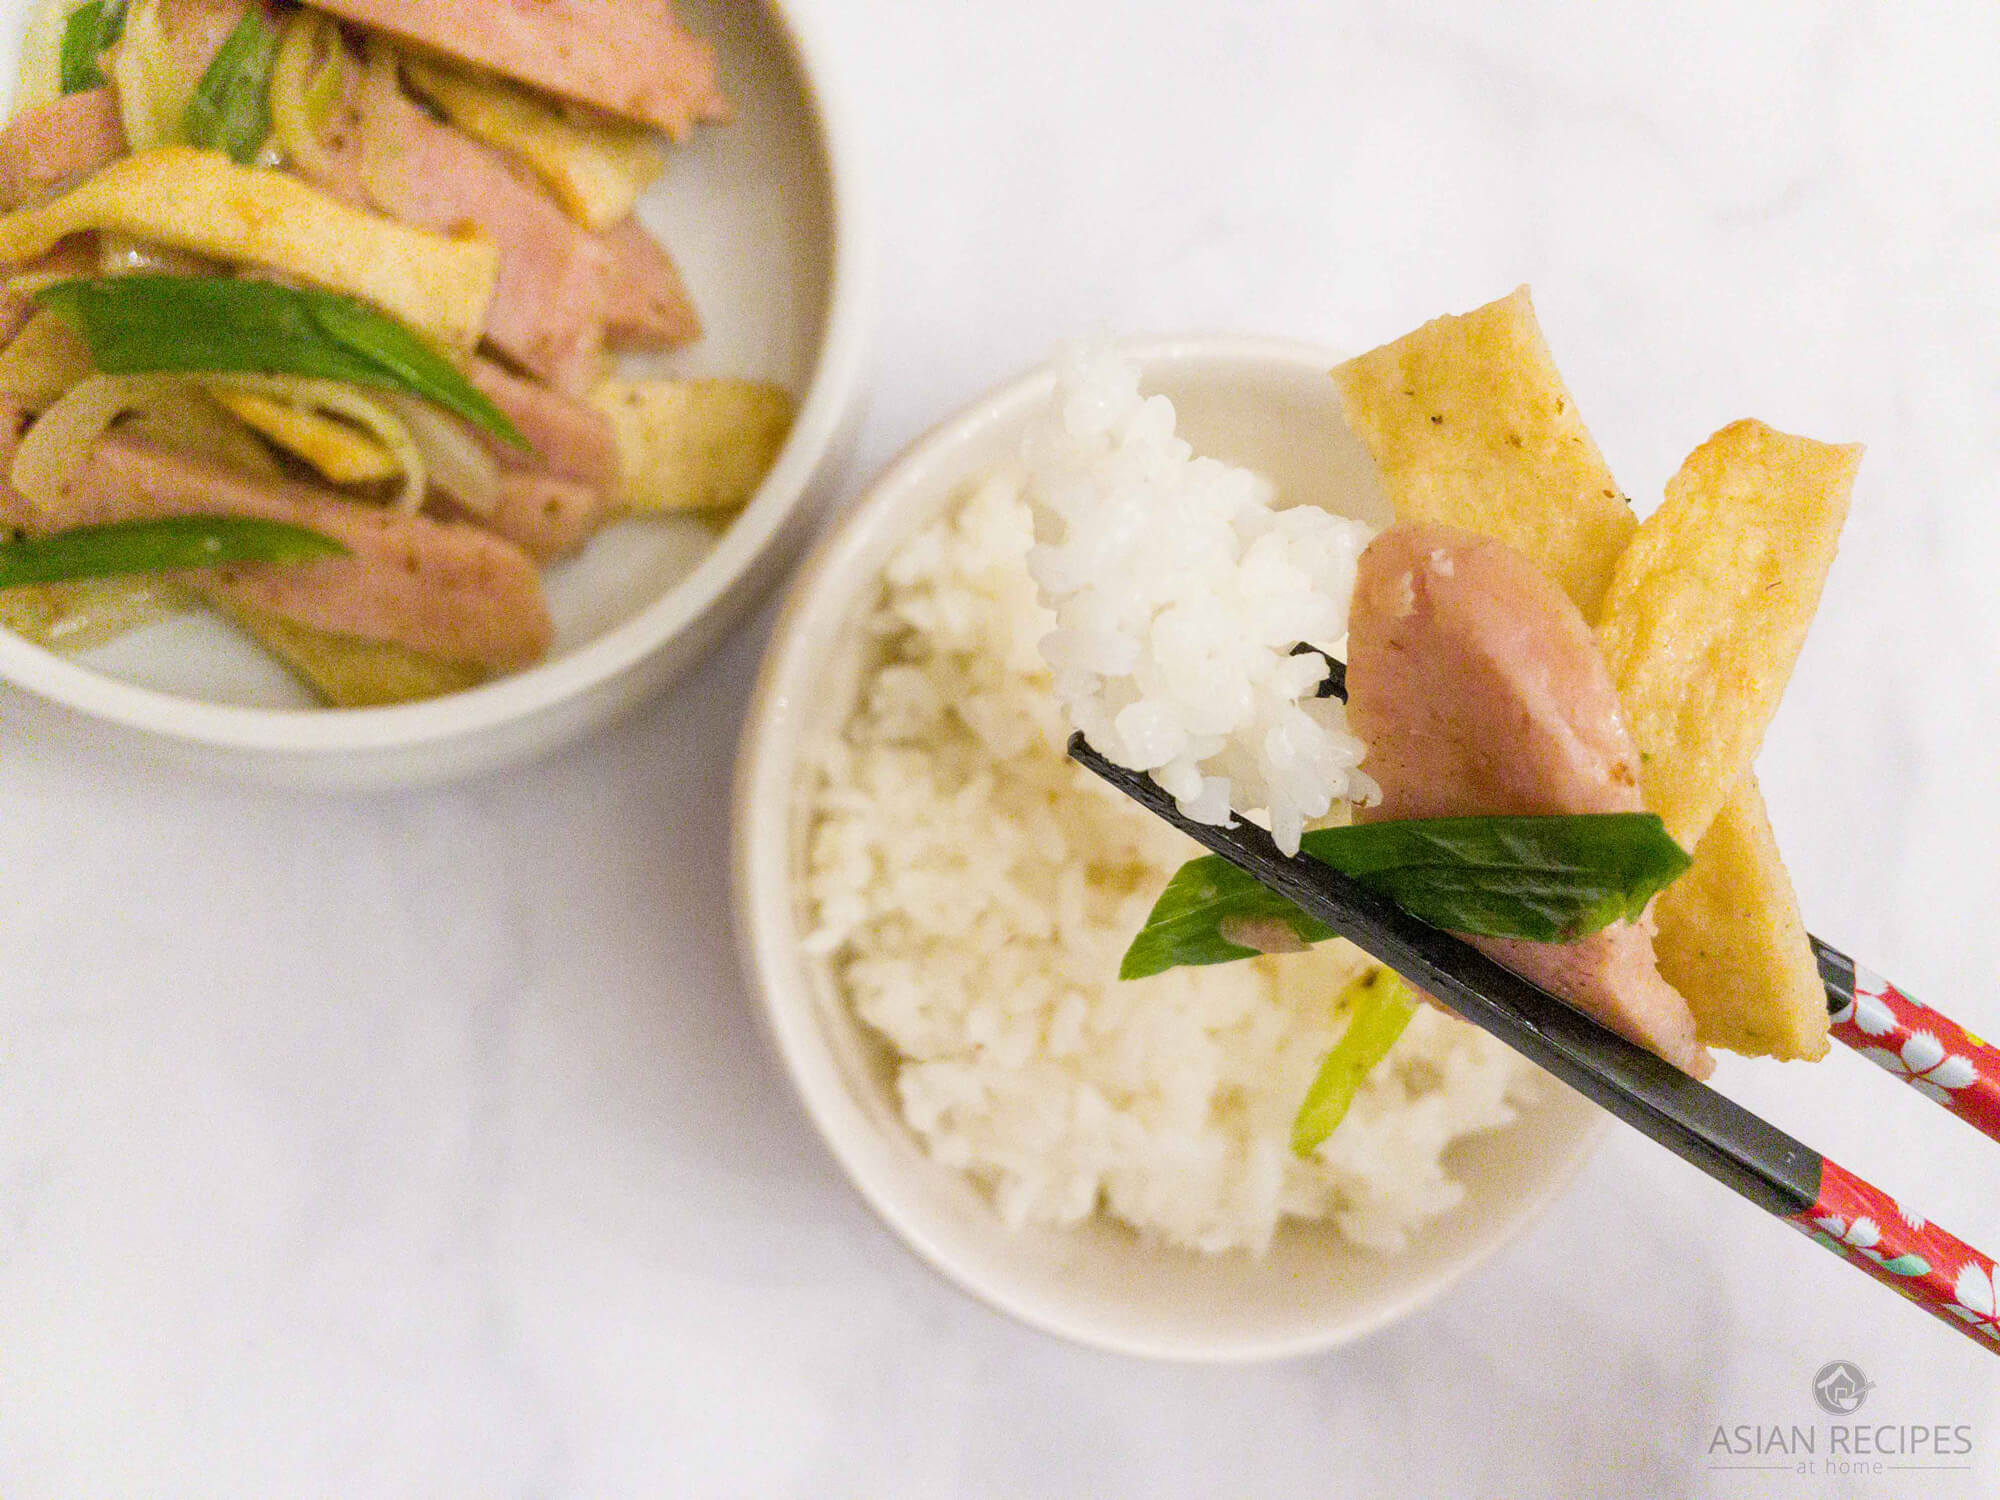 This side dish recipe is made with Spam, Korean-style flat fish cakes and onions.